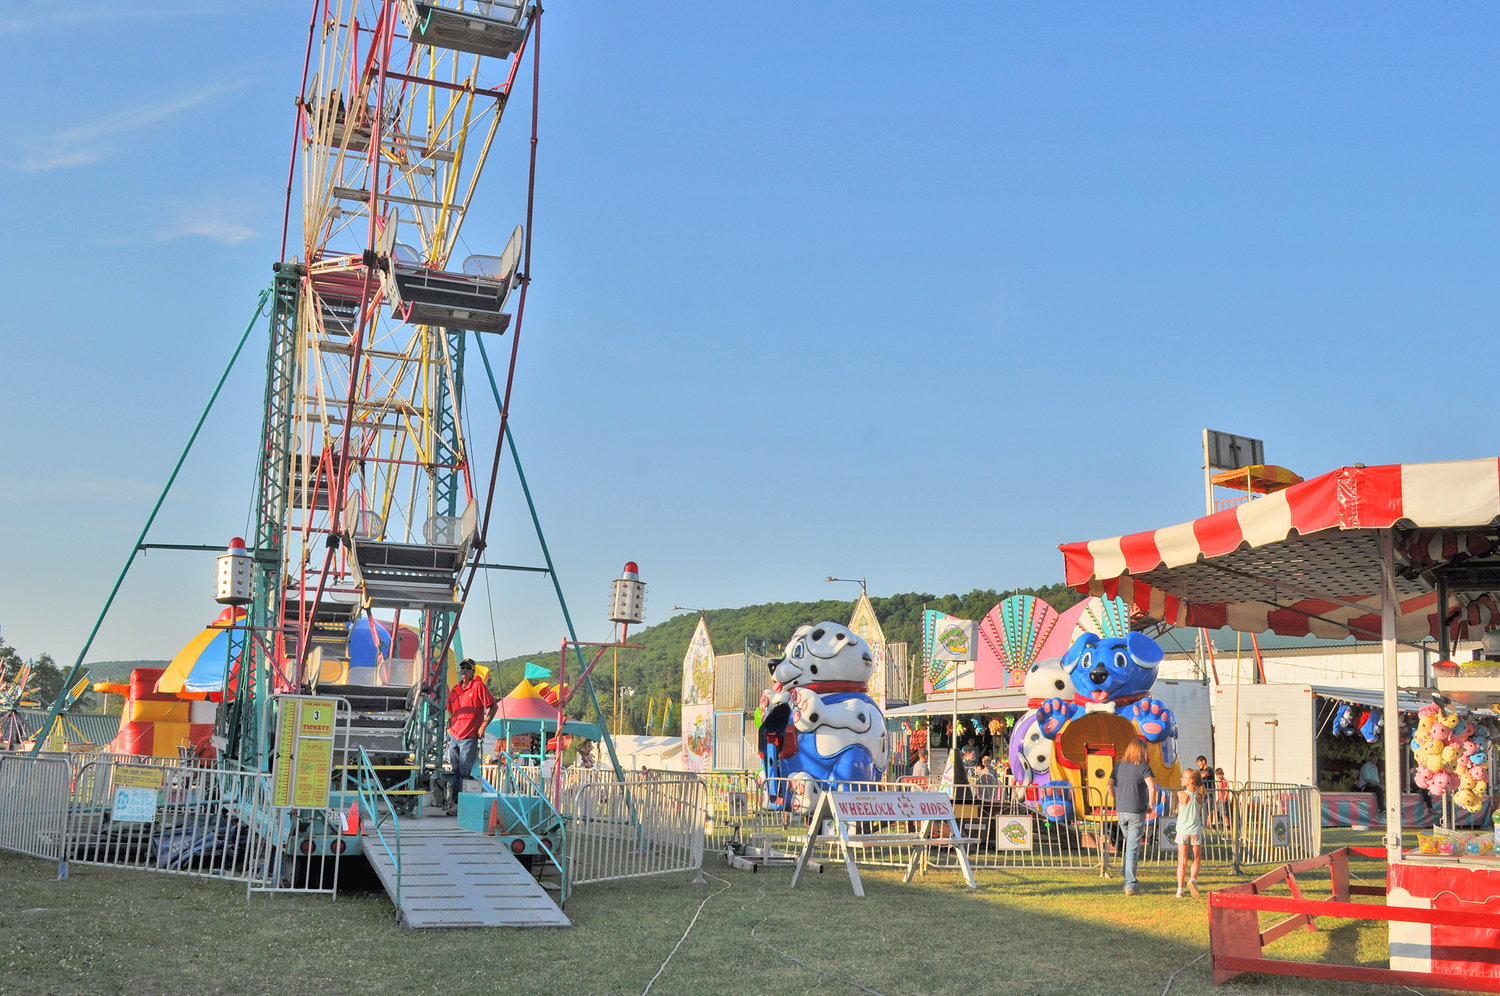 Wheelock Rides will be providing various amusement rides for the 2022 Madison County Fair held at 1968 Fairground Rd., Brookfield.